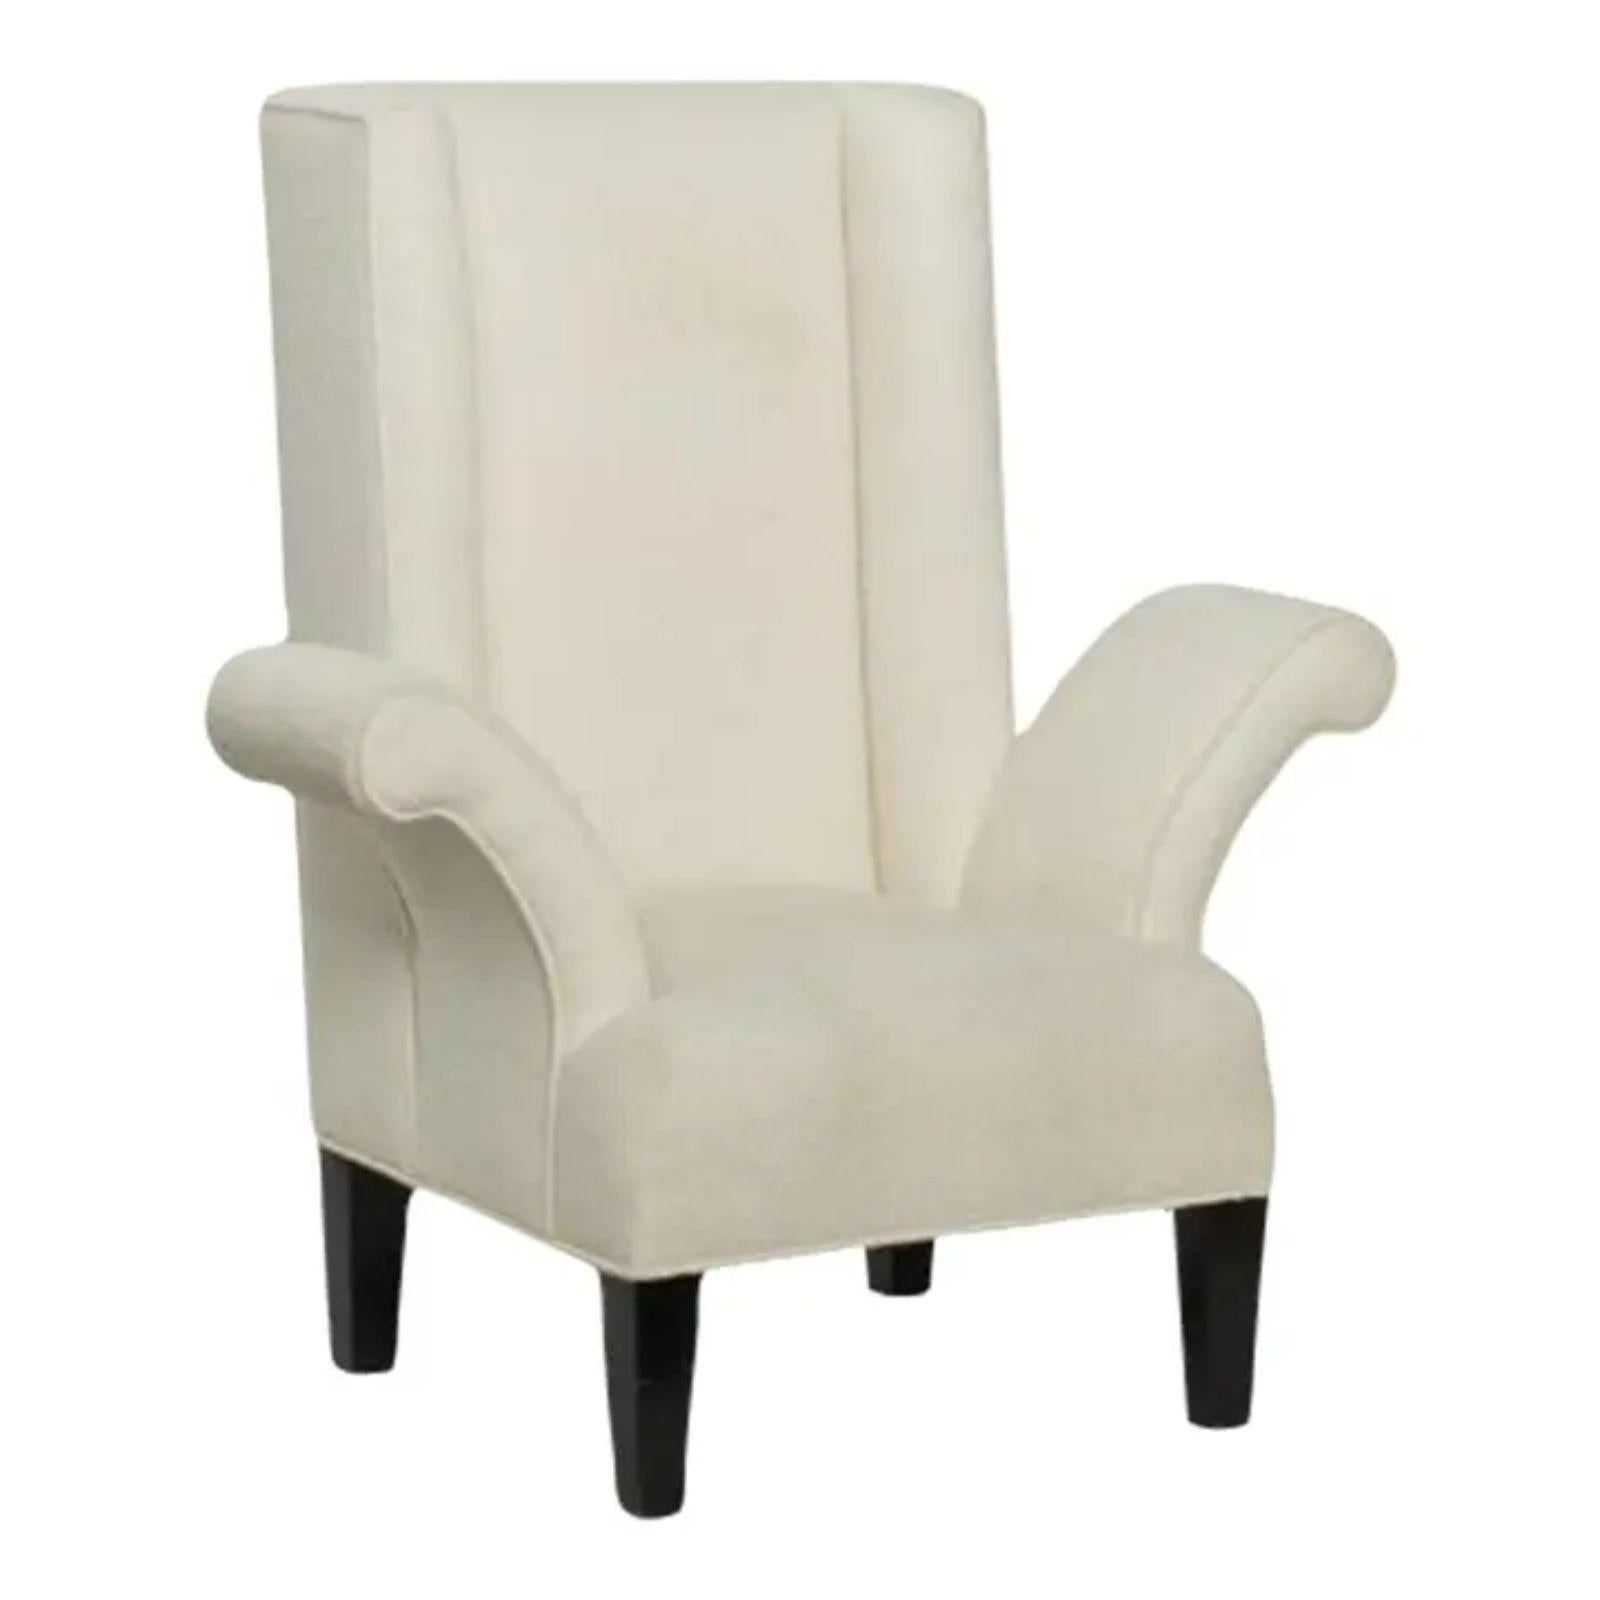 Mid Century Modern Flamboyant White Wingback Chair For Sale